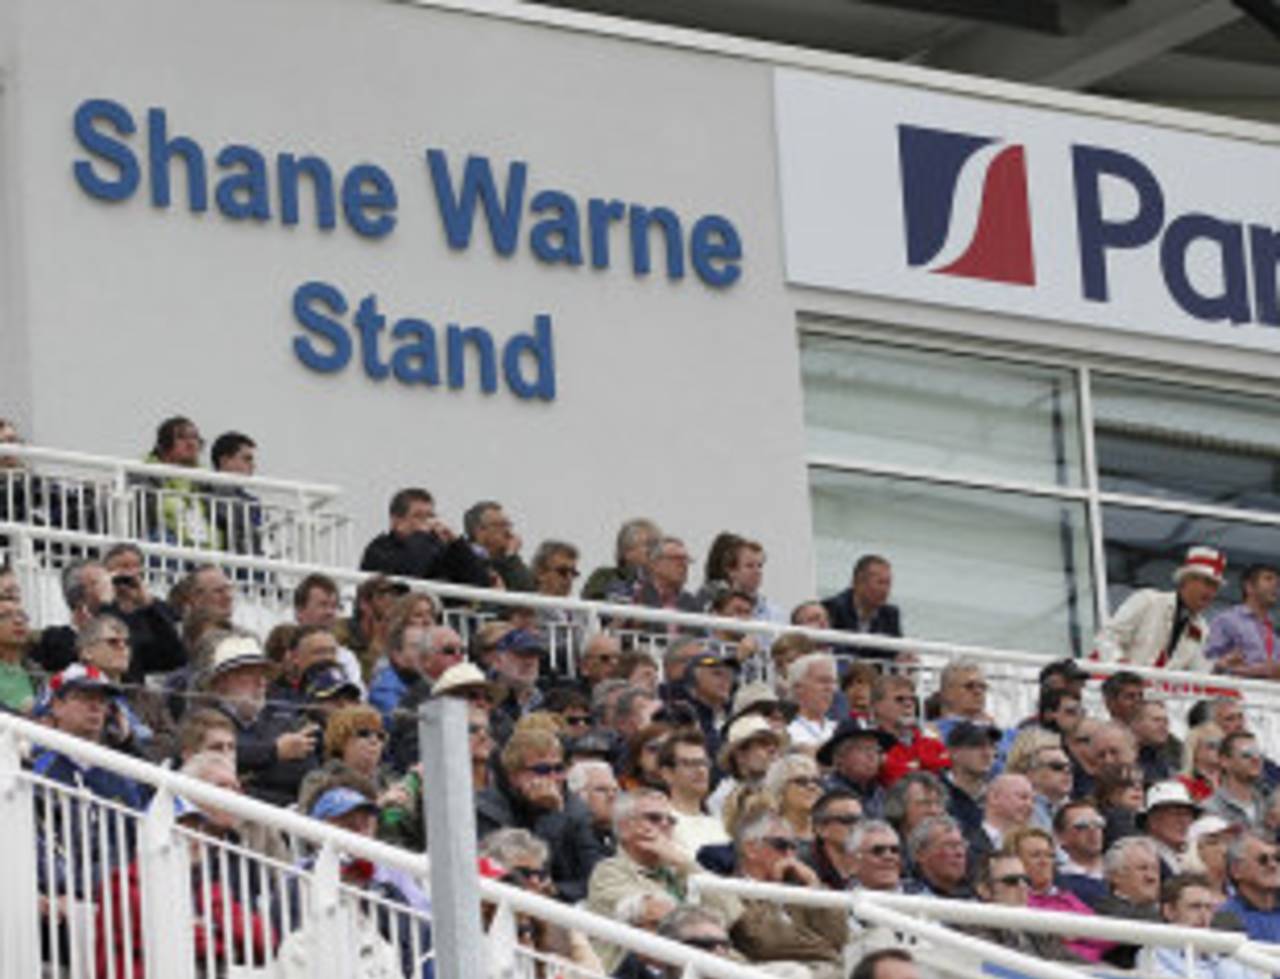 The Shane Warne Stand was officially opened, England v West Indies, 1st ODI, West End, June 16, 2012